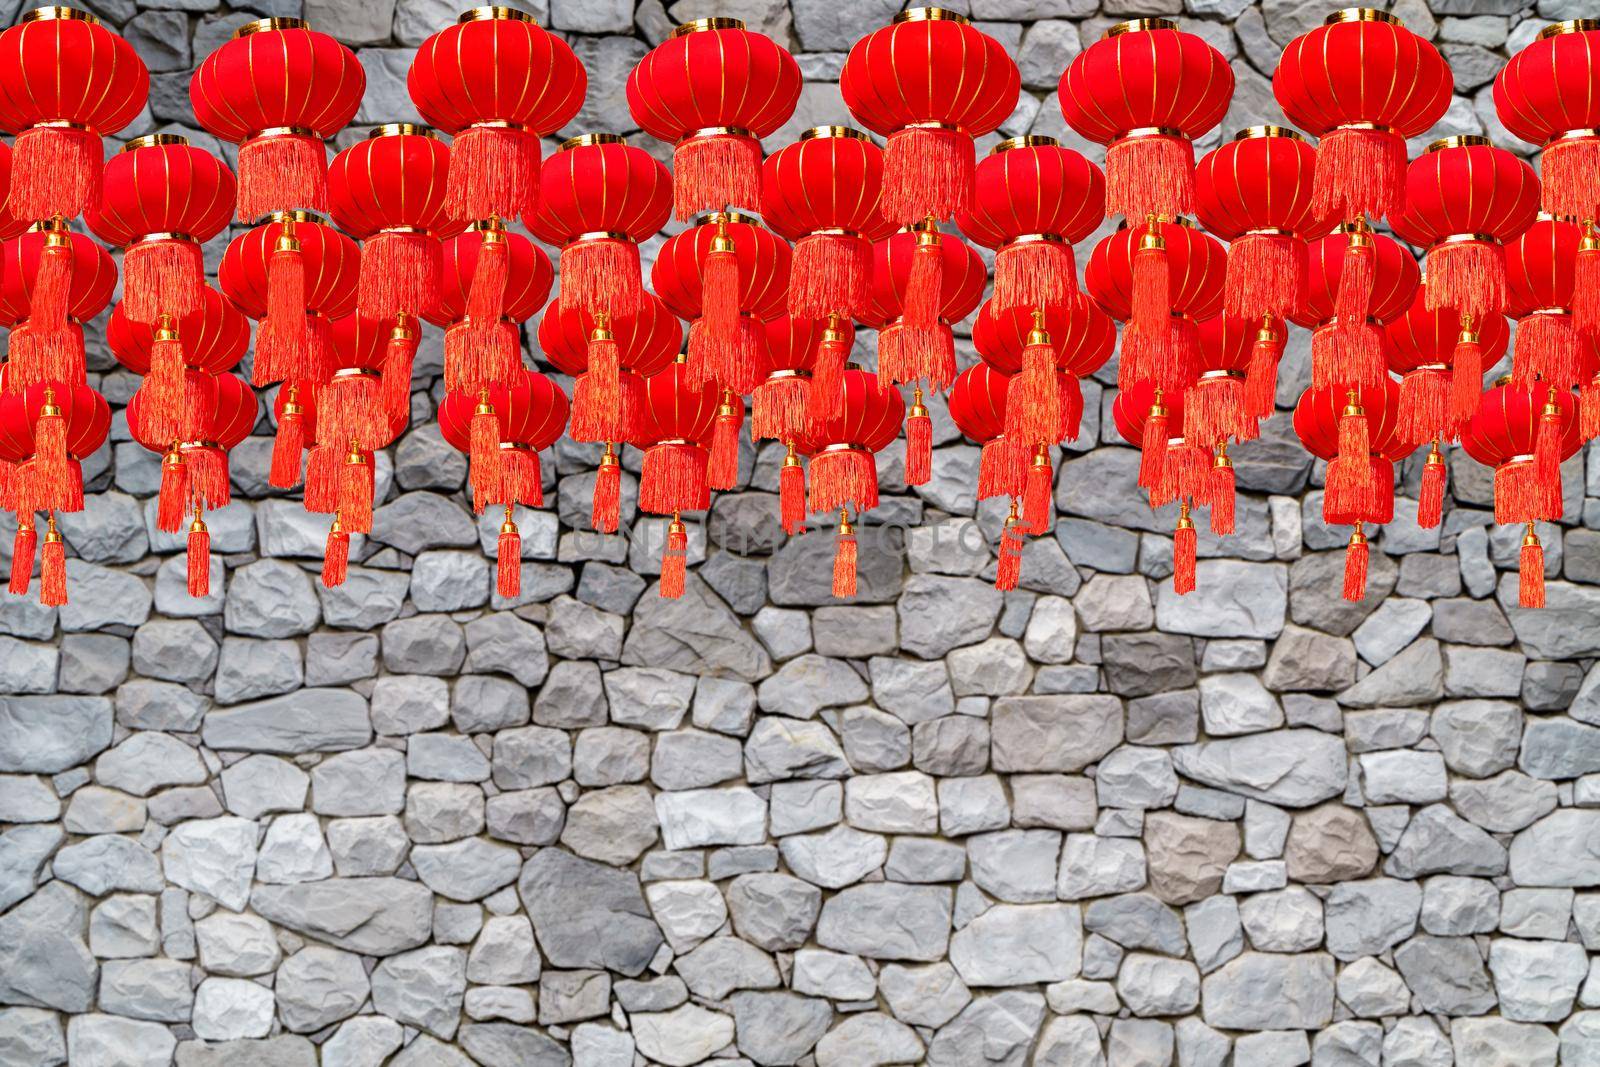 Chinese new year lanterns for celebration hanging on street. by toa55